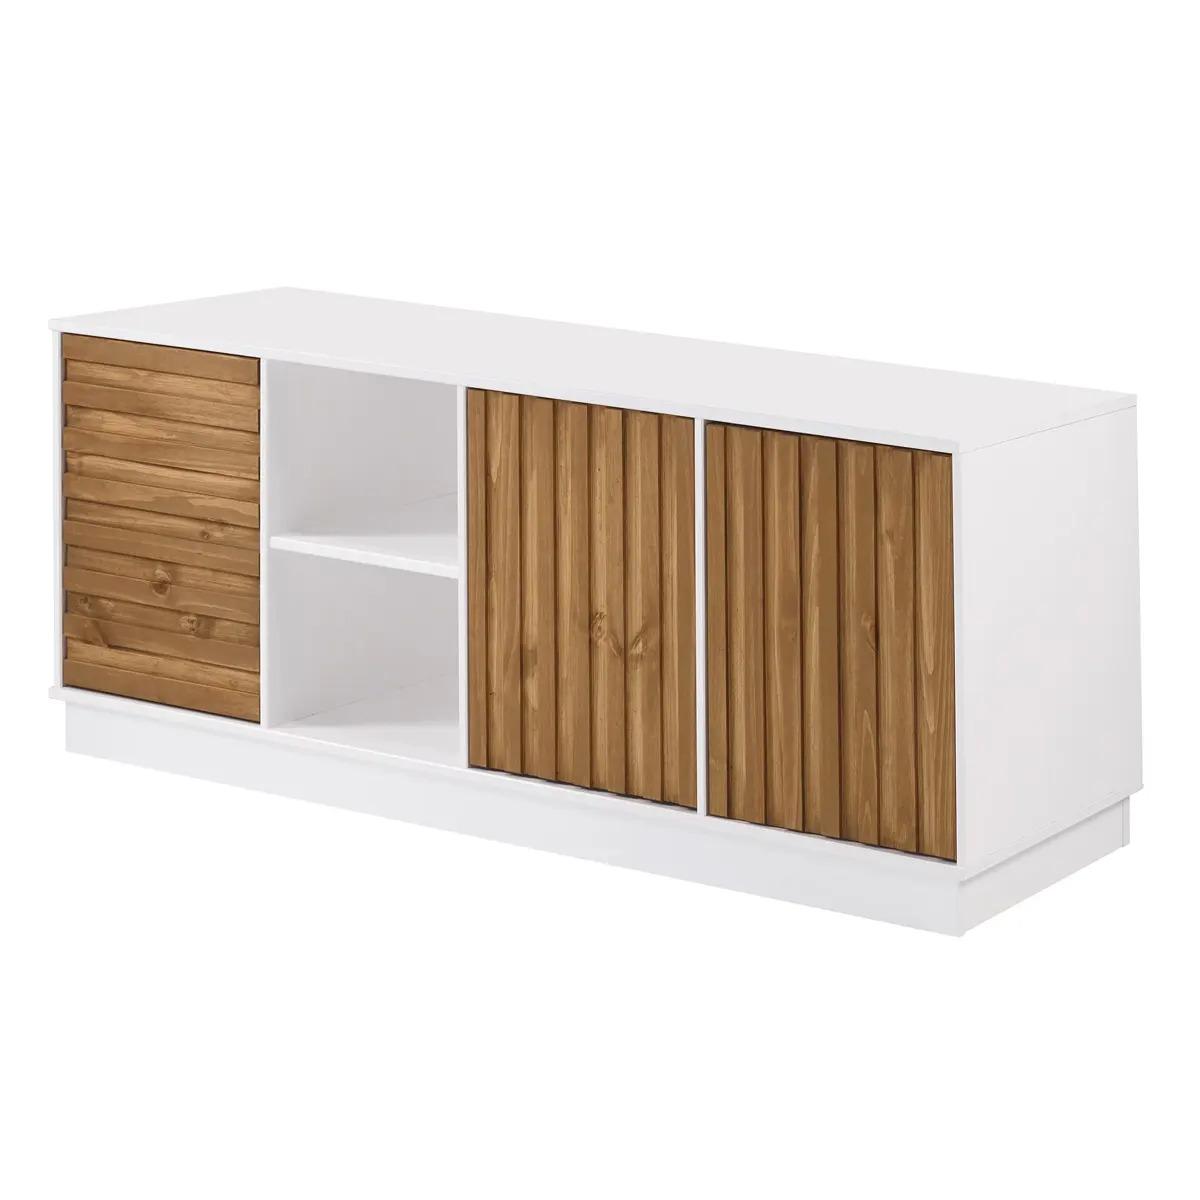 Manor Park Modern 3 Grooved Door Solid Wood TV Stand for $129.12 Shipped